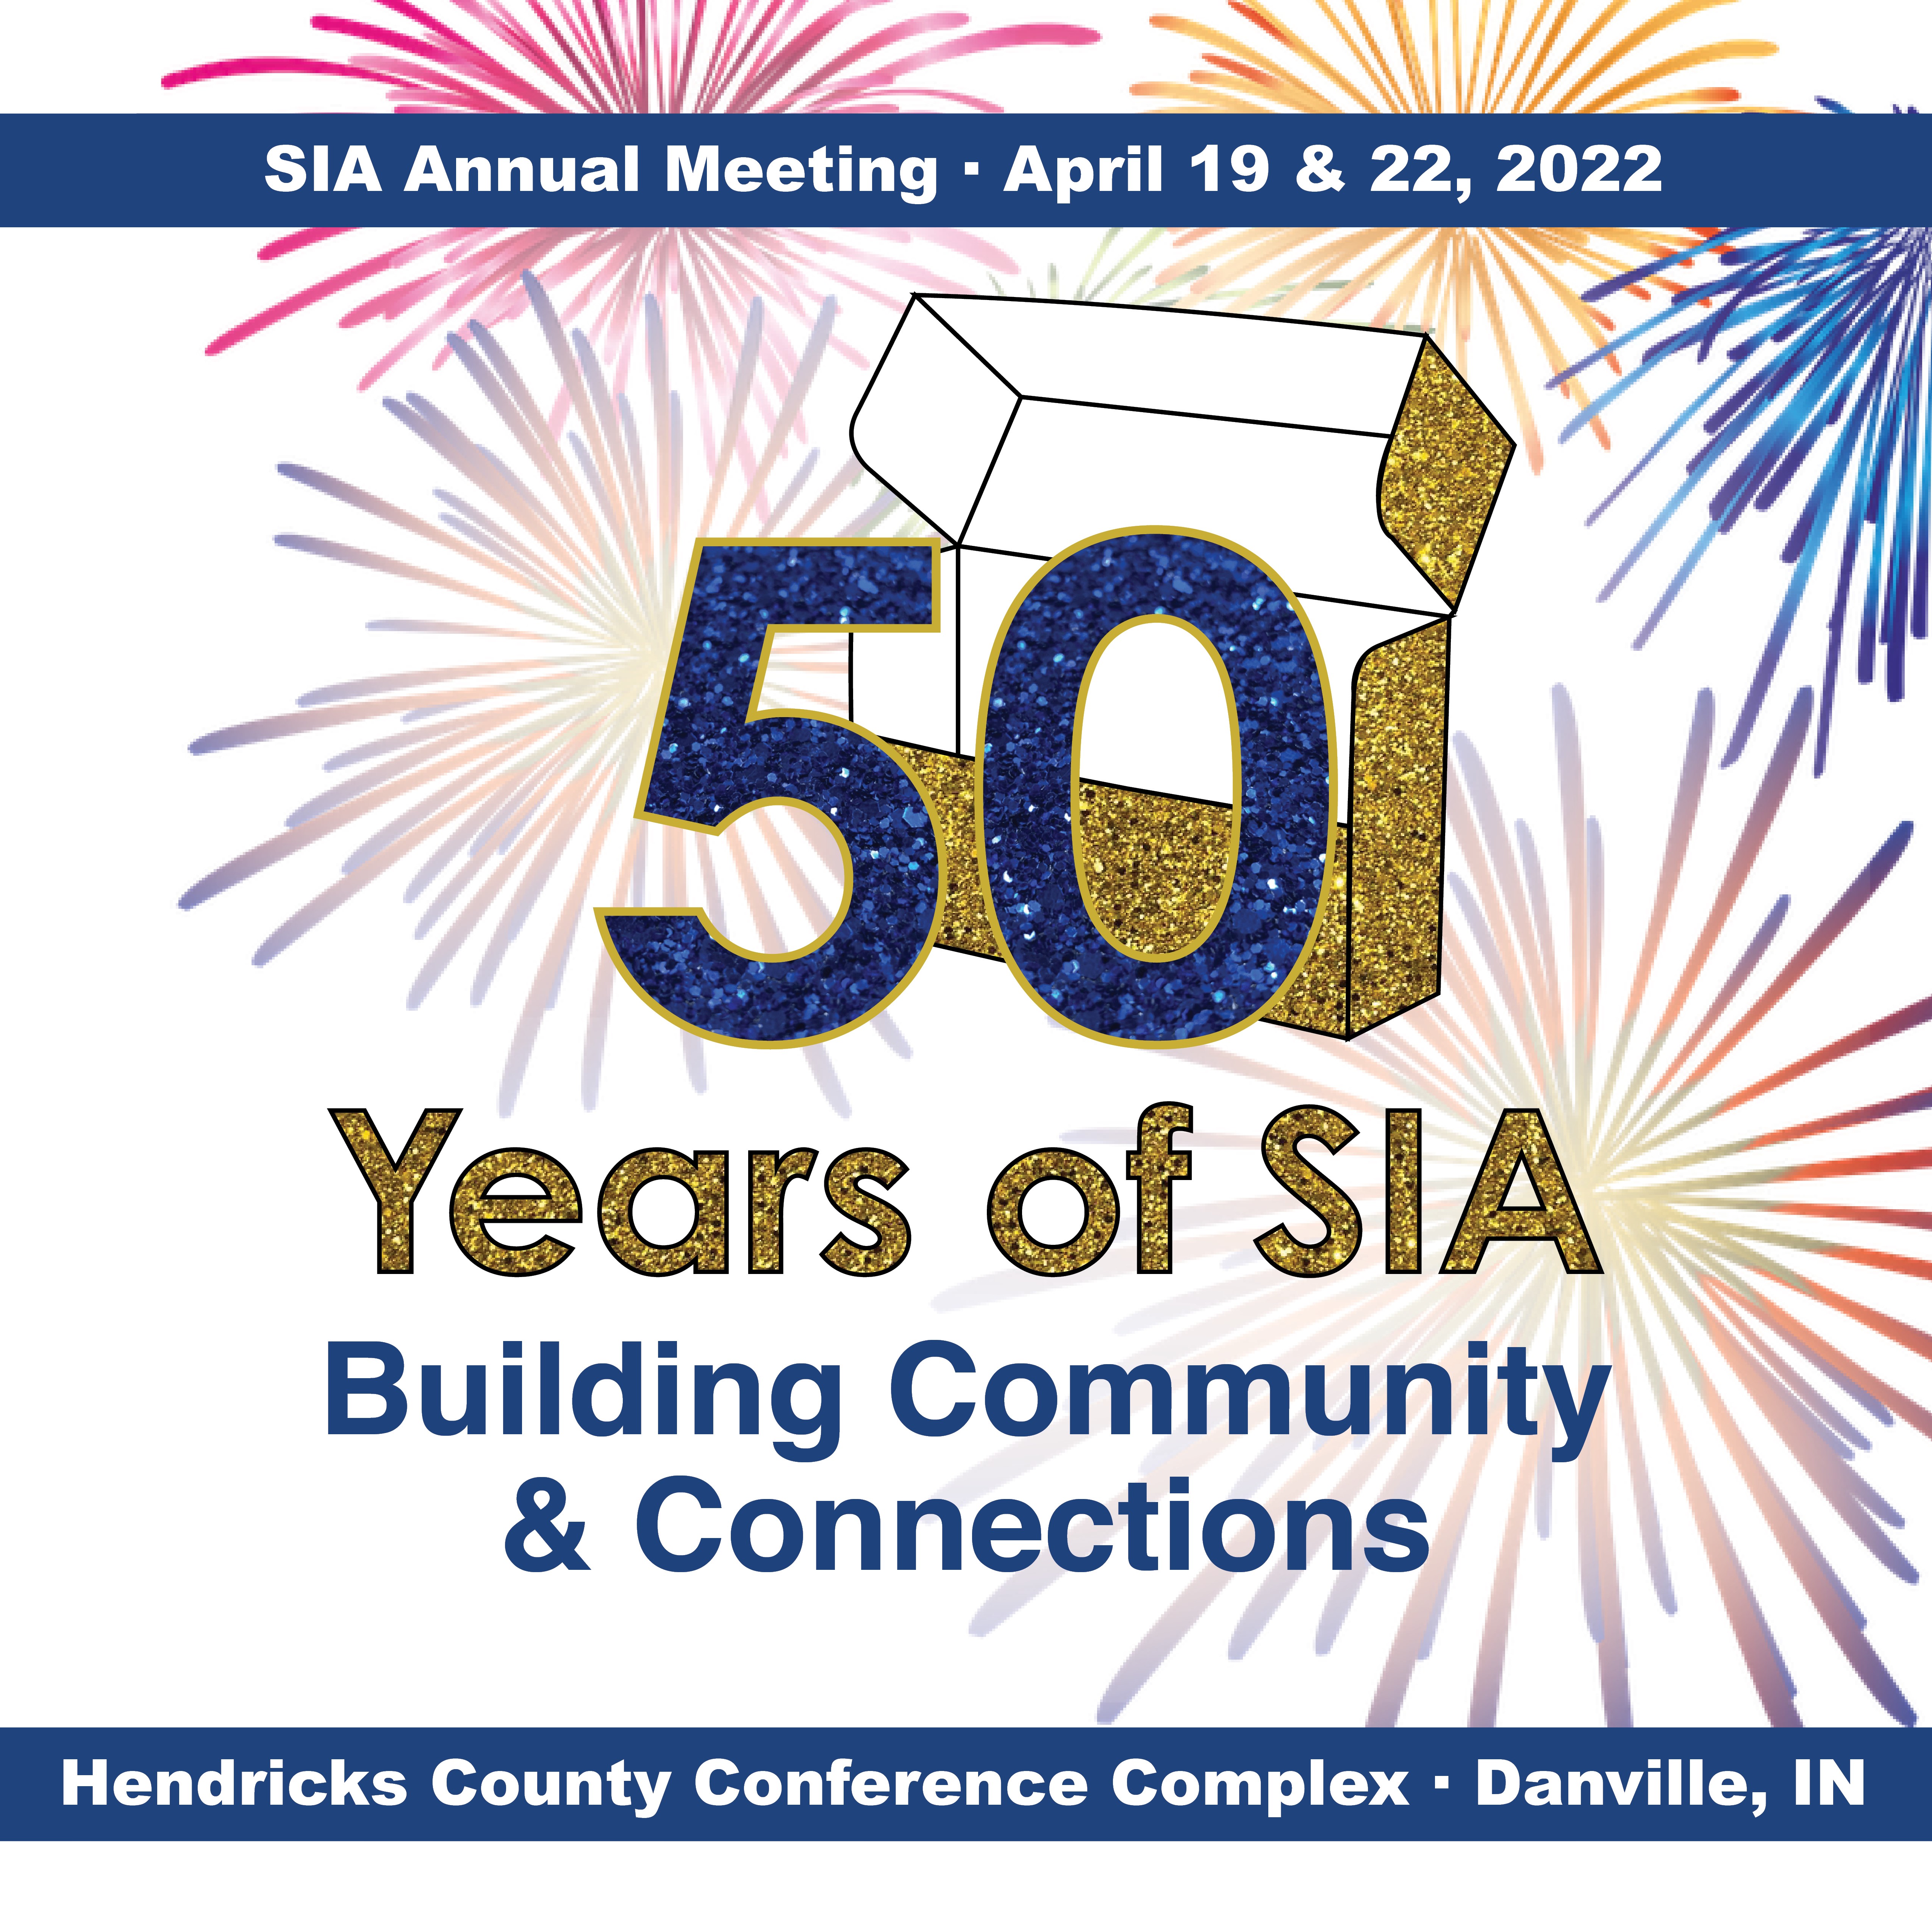 Annual meeting logo. Text reads "SIA Annual Meeting, April 19 & 22, 2022. 50 years of SIA: Building Community and Connections. Hendricks County Conference Complex, Danville IN. There are colorful fireworks in the background. Fifty years of SIA is in blue and gold glitter and there is a gold, glittery Hollinger box behind the 50.